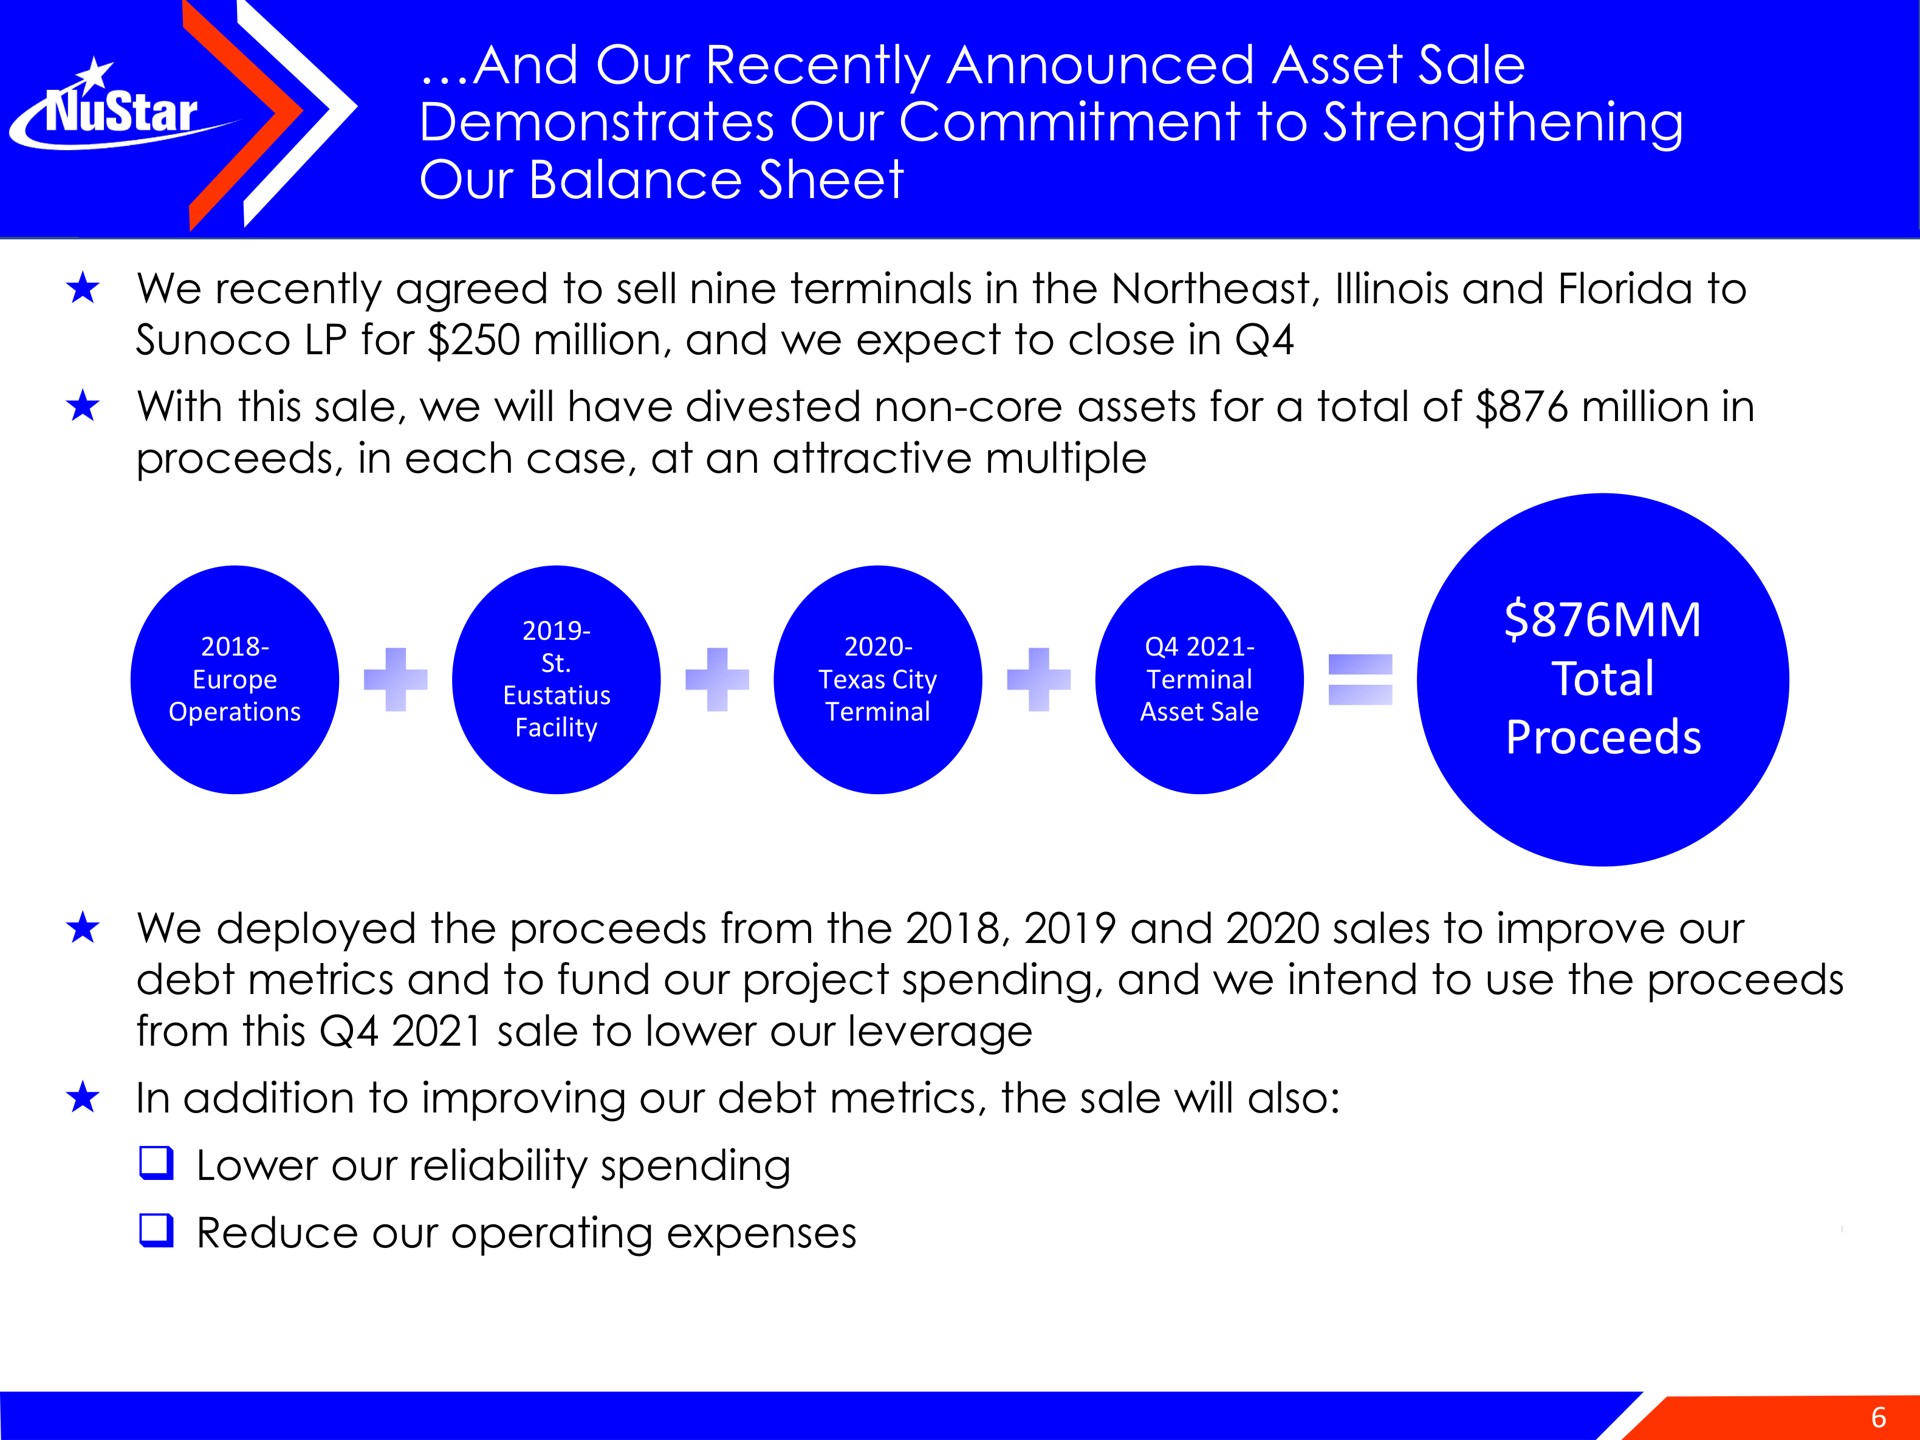 and our recently announced asset sale demonstrates our commitment to strengthening our balance sheet | NuStar Energy